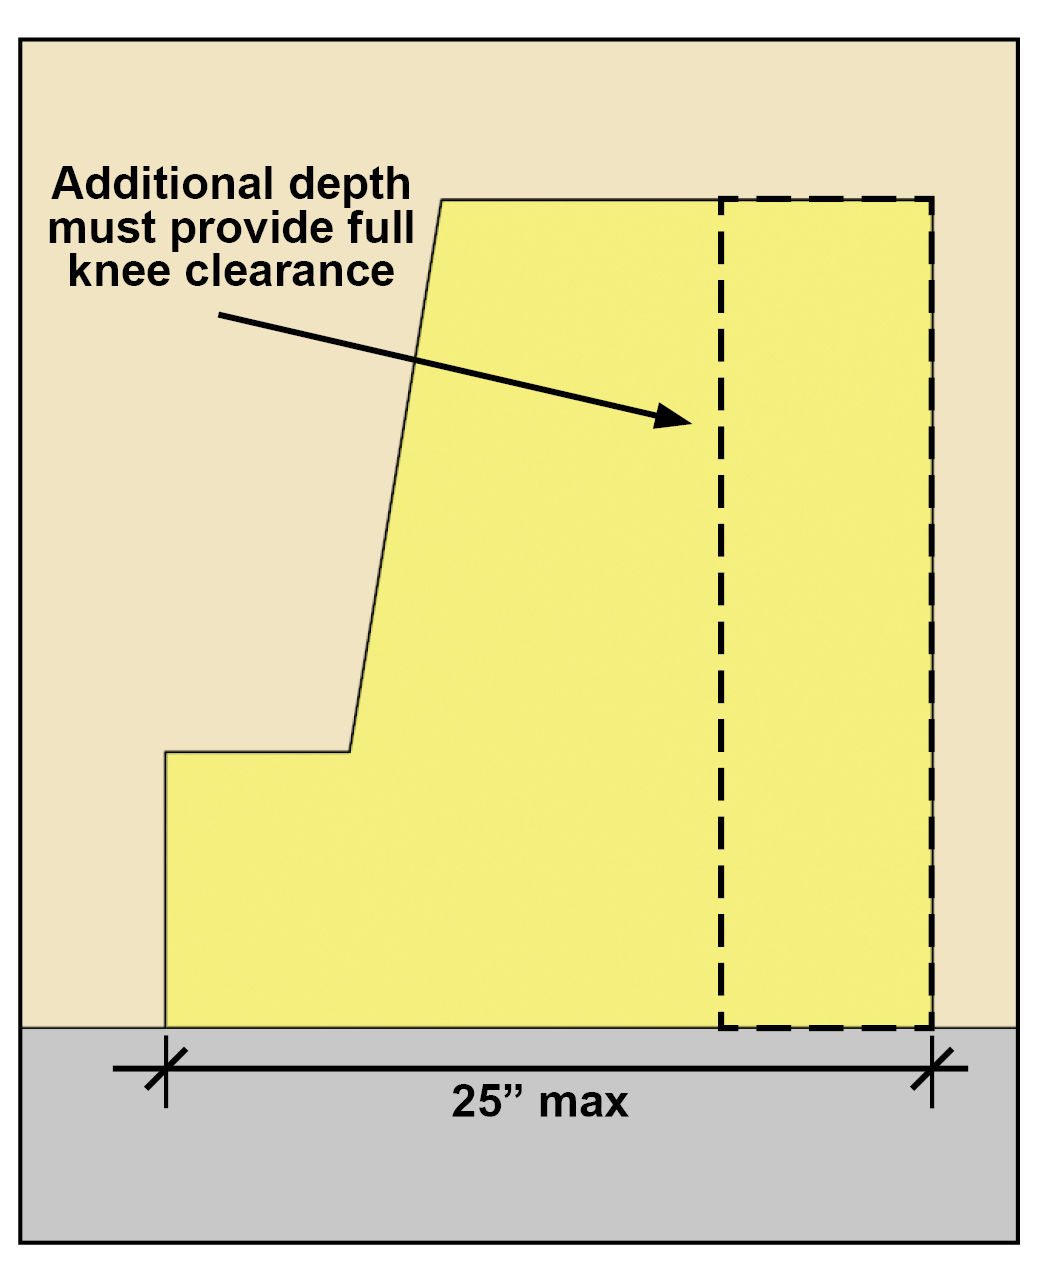 Side view diagram of knee and toe space, showing knee and toe space 25 inches deep maximum.  Note over arrow reads: Additional depth must provide full knee clearance.